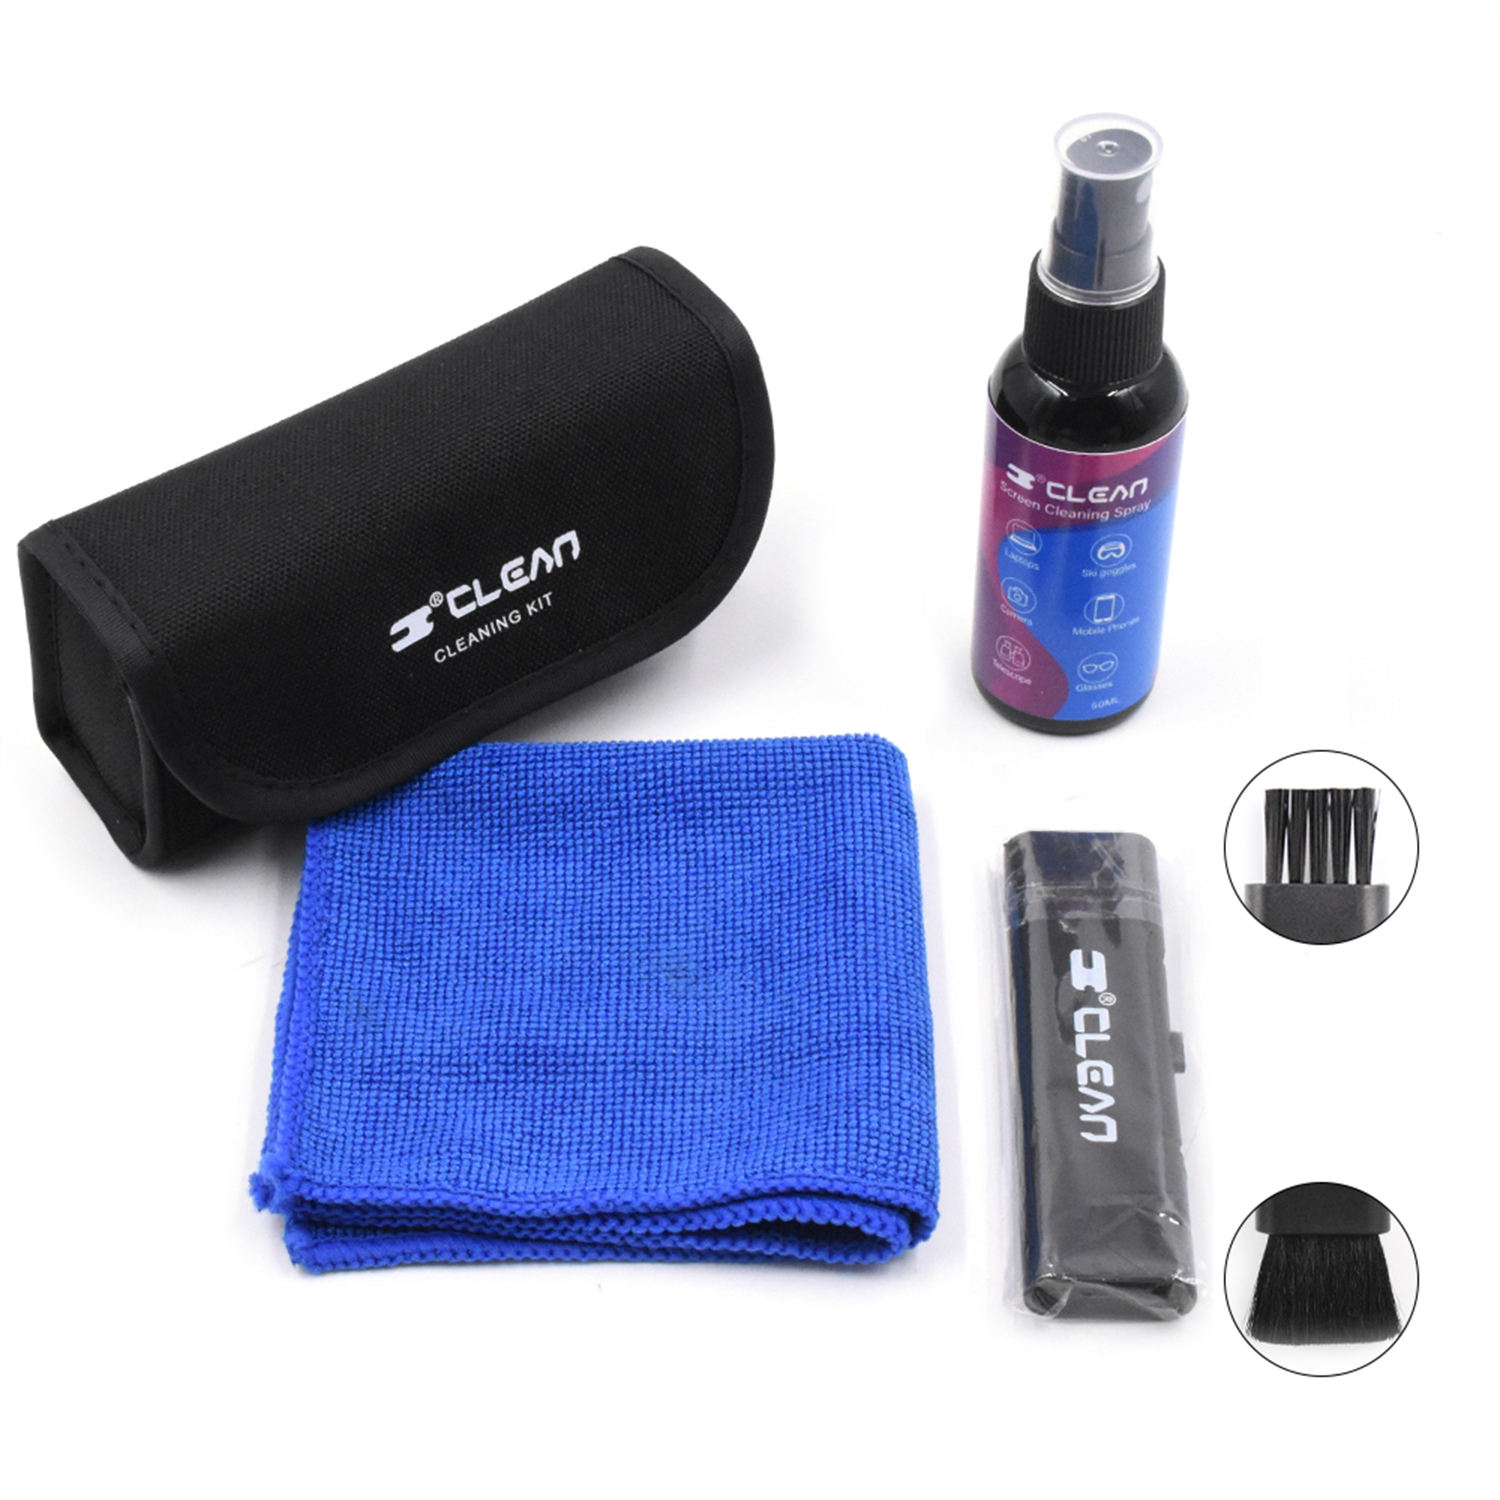 Why choose our eyeglass cleaning kit? Discover 10 great advantages!